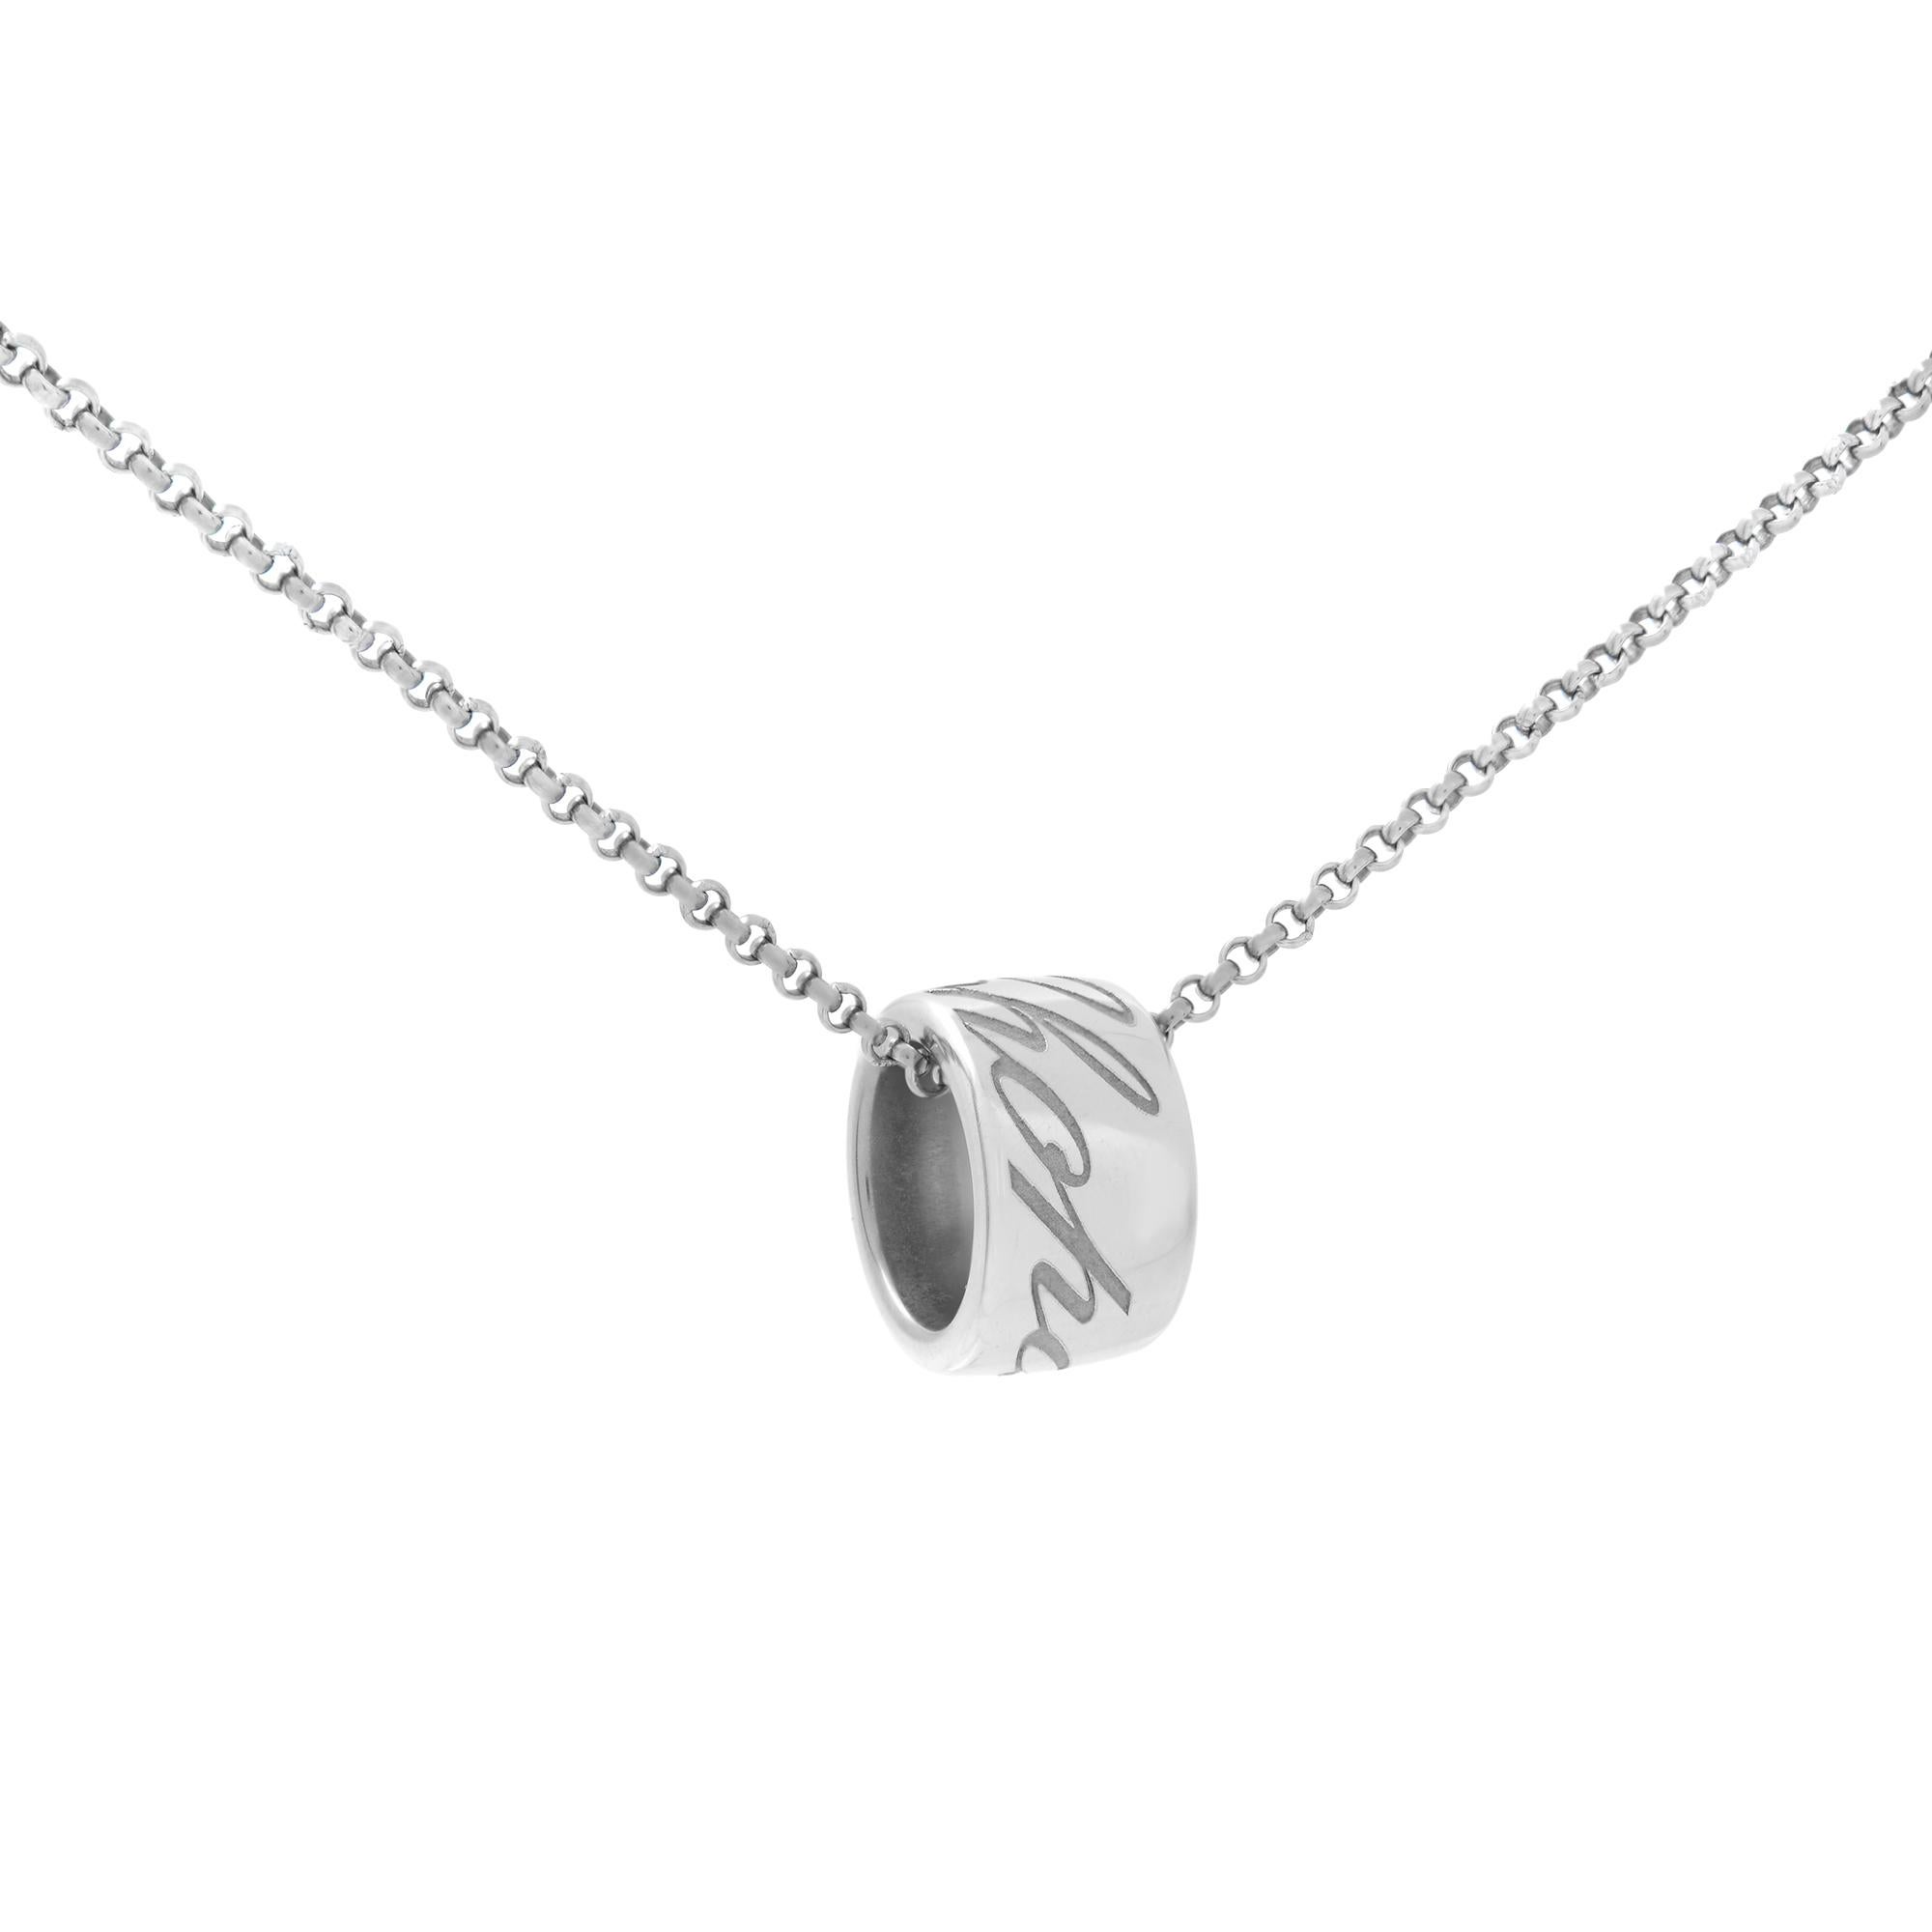 Chopard 18K White Gold Chopardissimo Pendant Necklace In Excellent Condition For Sale In New York, NY